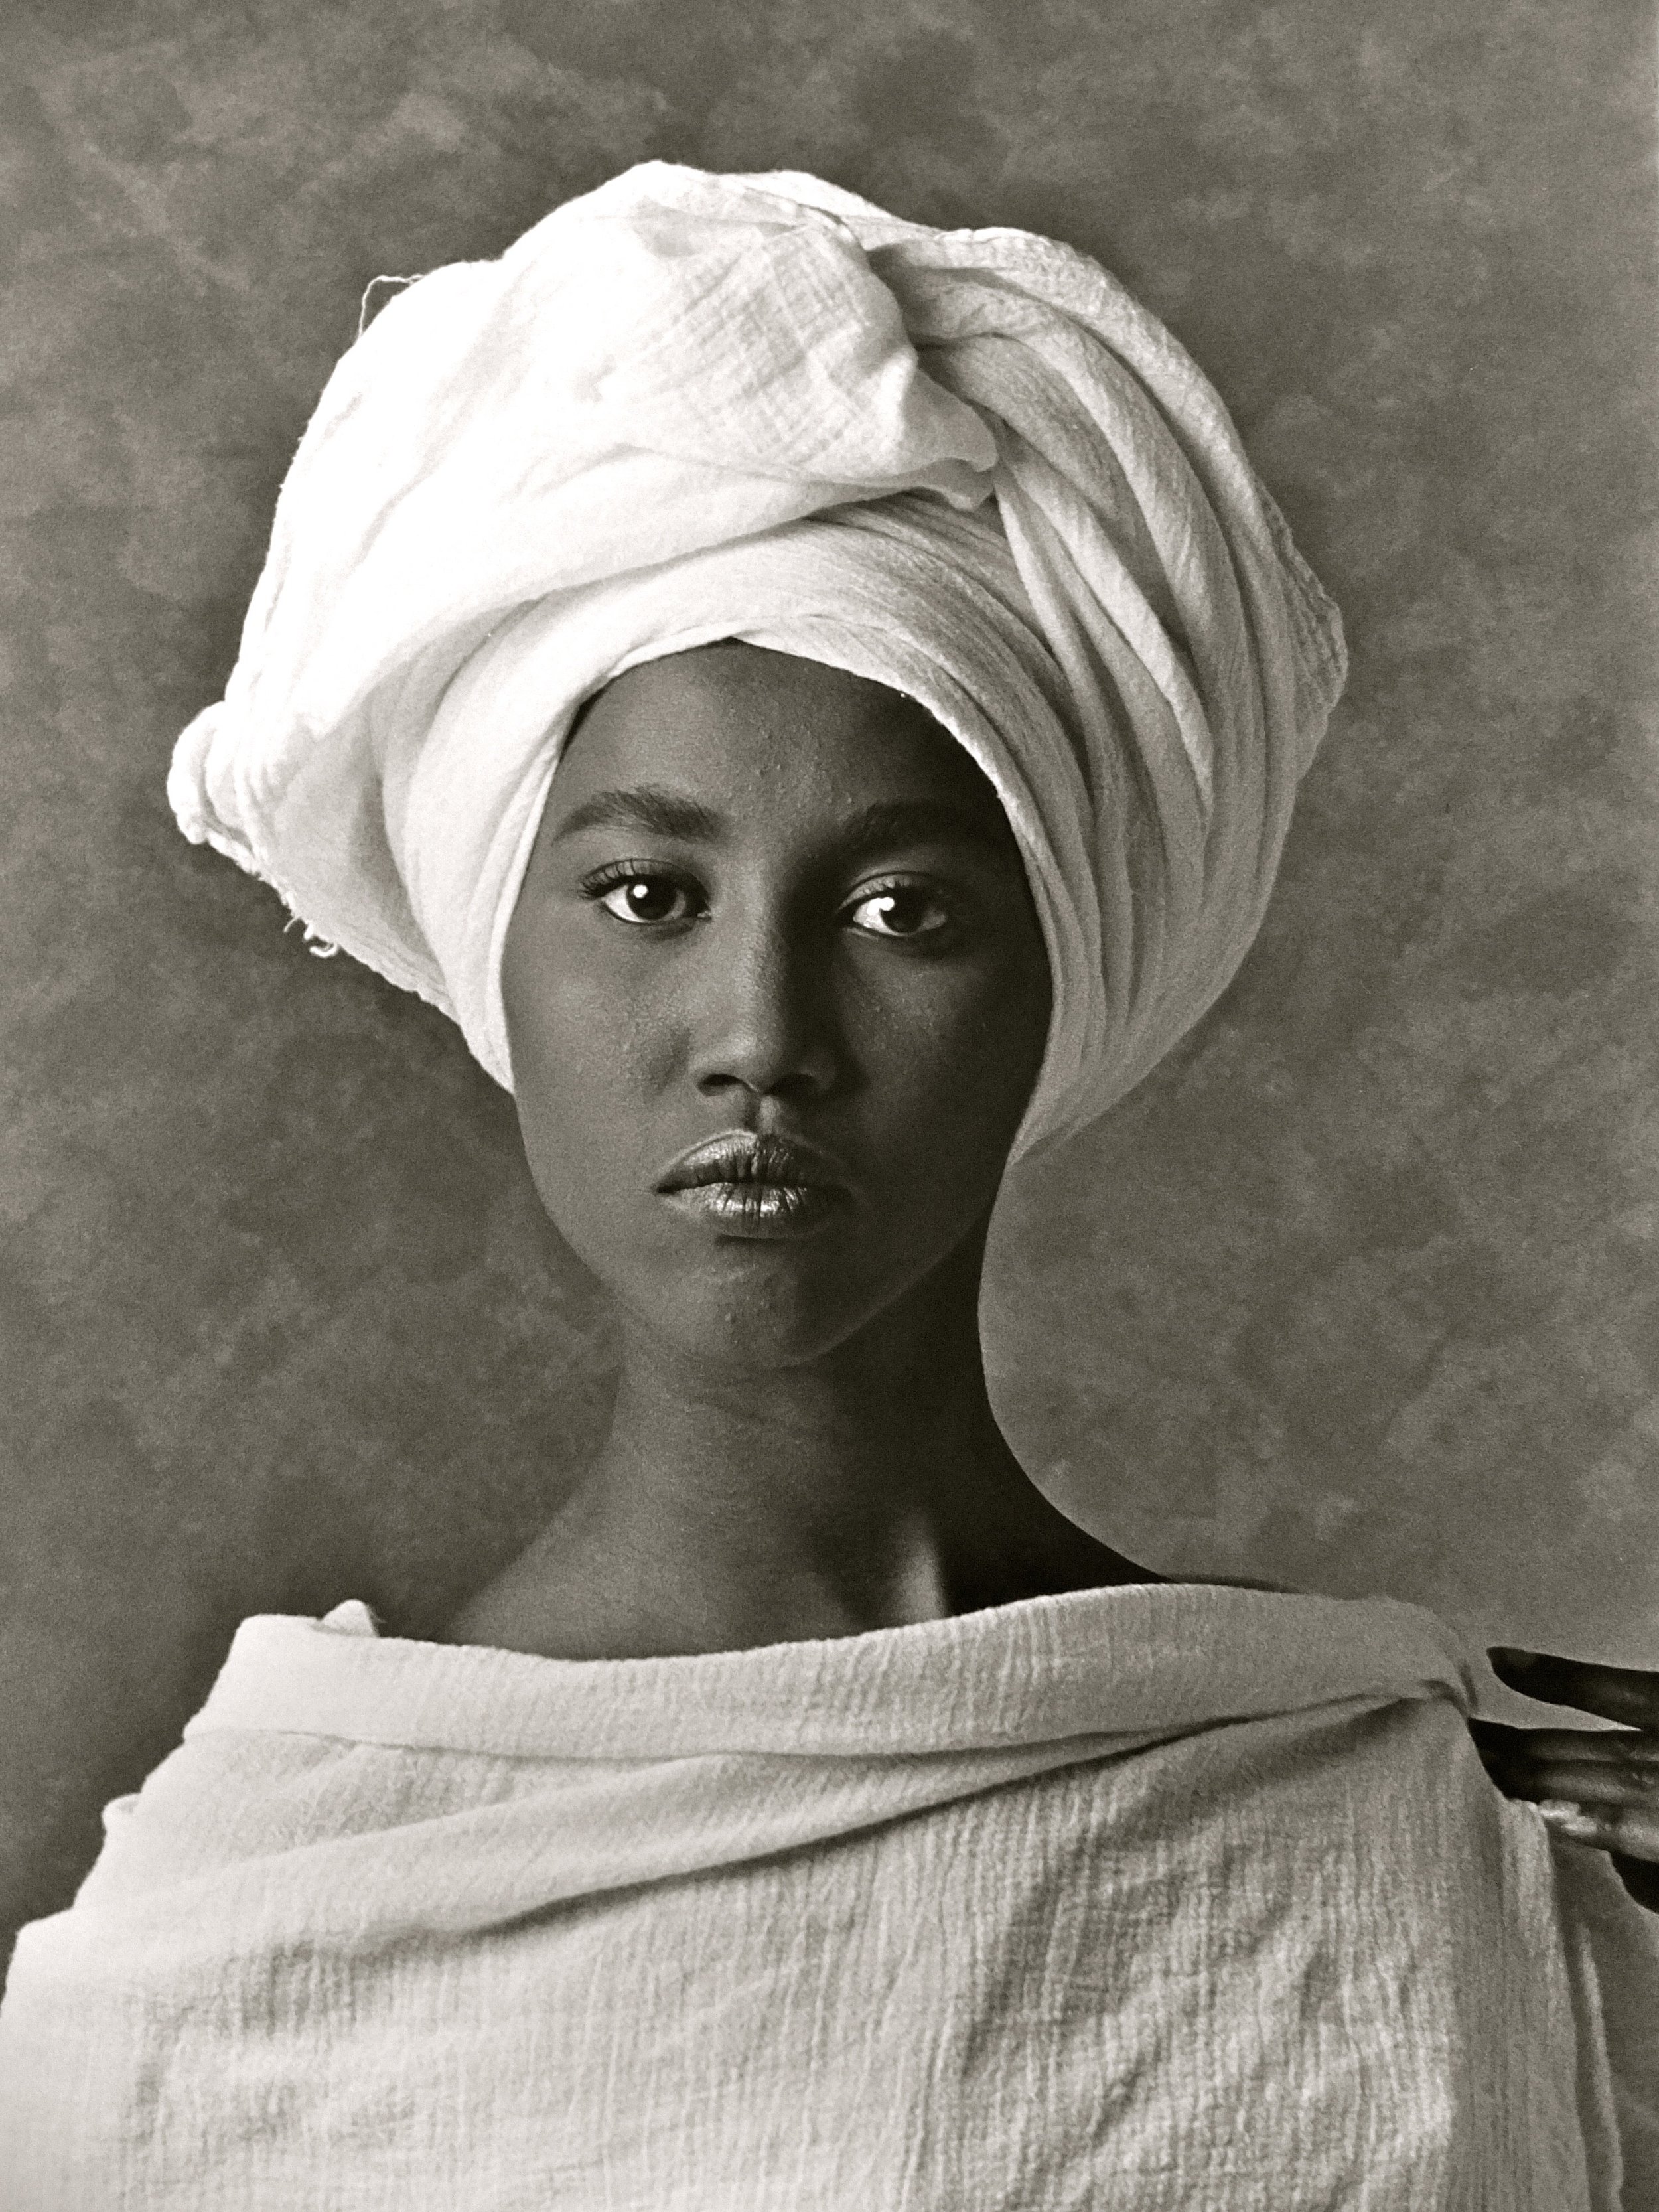  A black and white portrait of a woman of dark complexion from the clavicle up. She has a head wrap and garb made of the same white fabric. The fingers of her left hand rest on her left shoulder. 